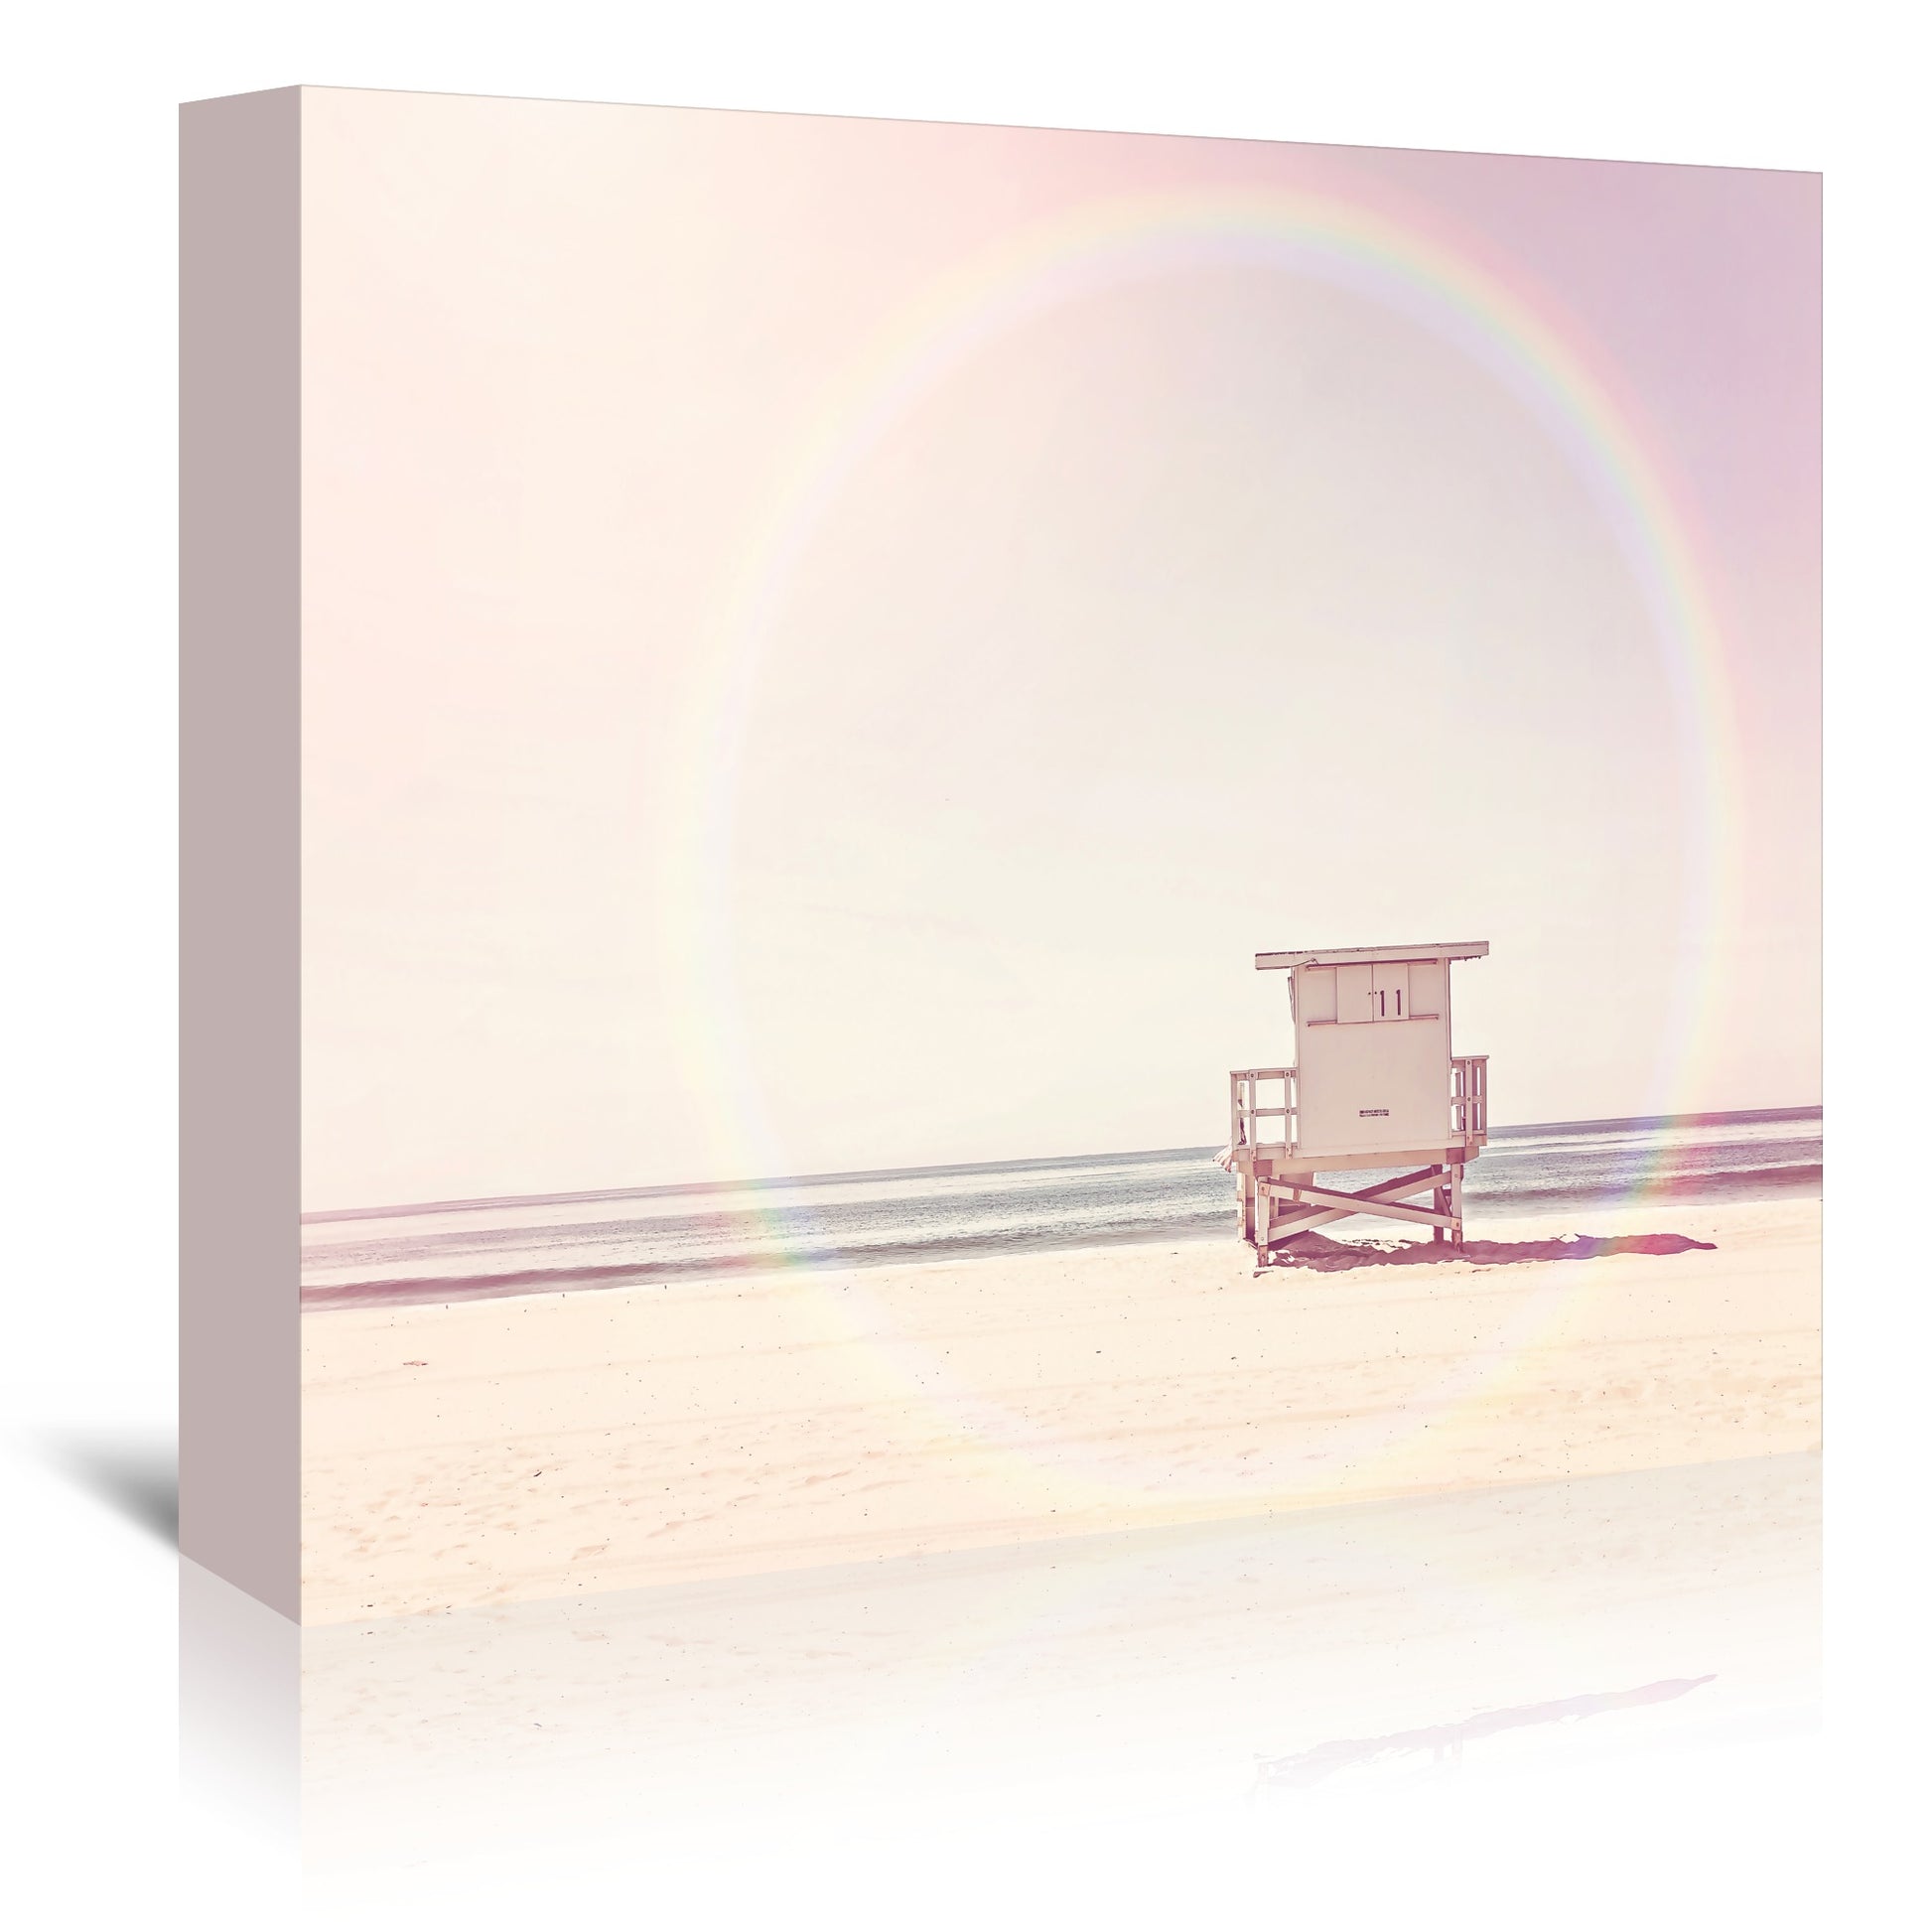 Beach Photography - 6 Piece Canvas Gallery Wall Set - Americanflat